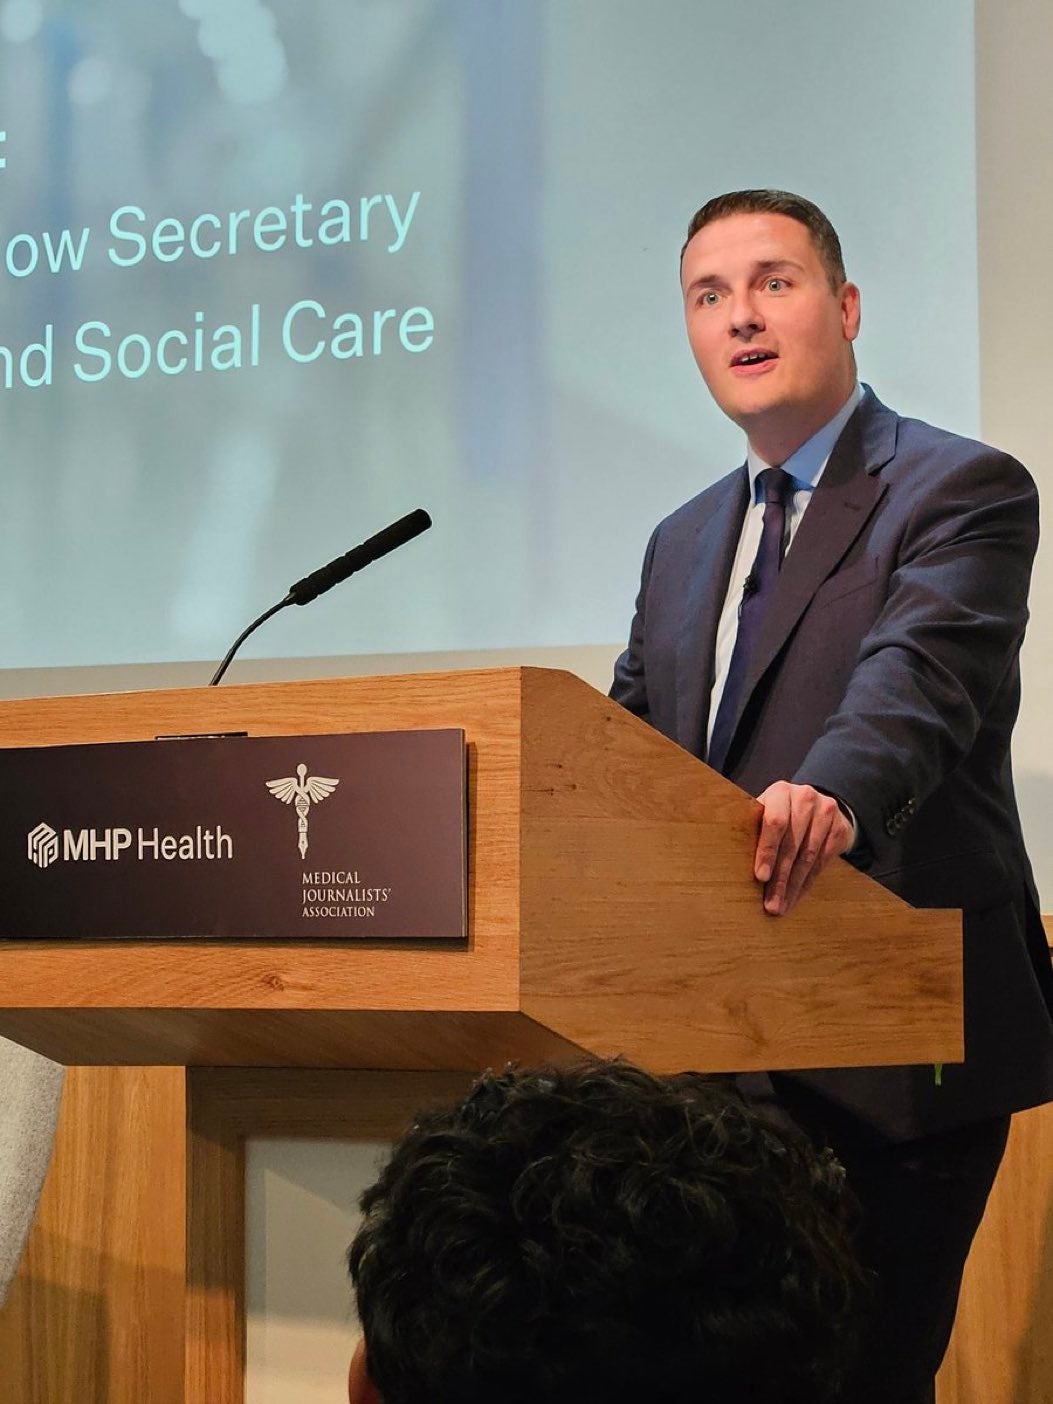 Wes Streeting, the Labour shadow health secretary, speaking at a Medical Journalists‘ Association event